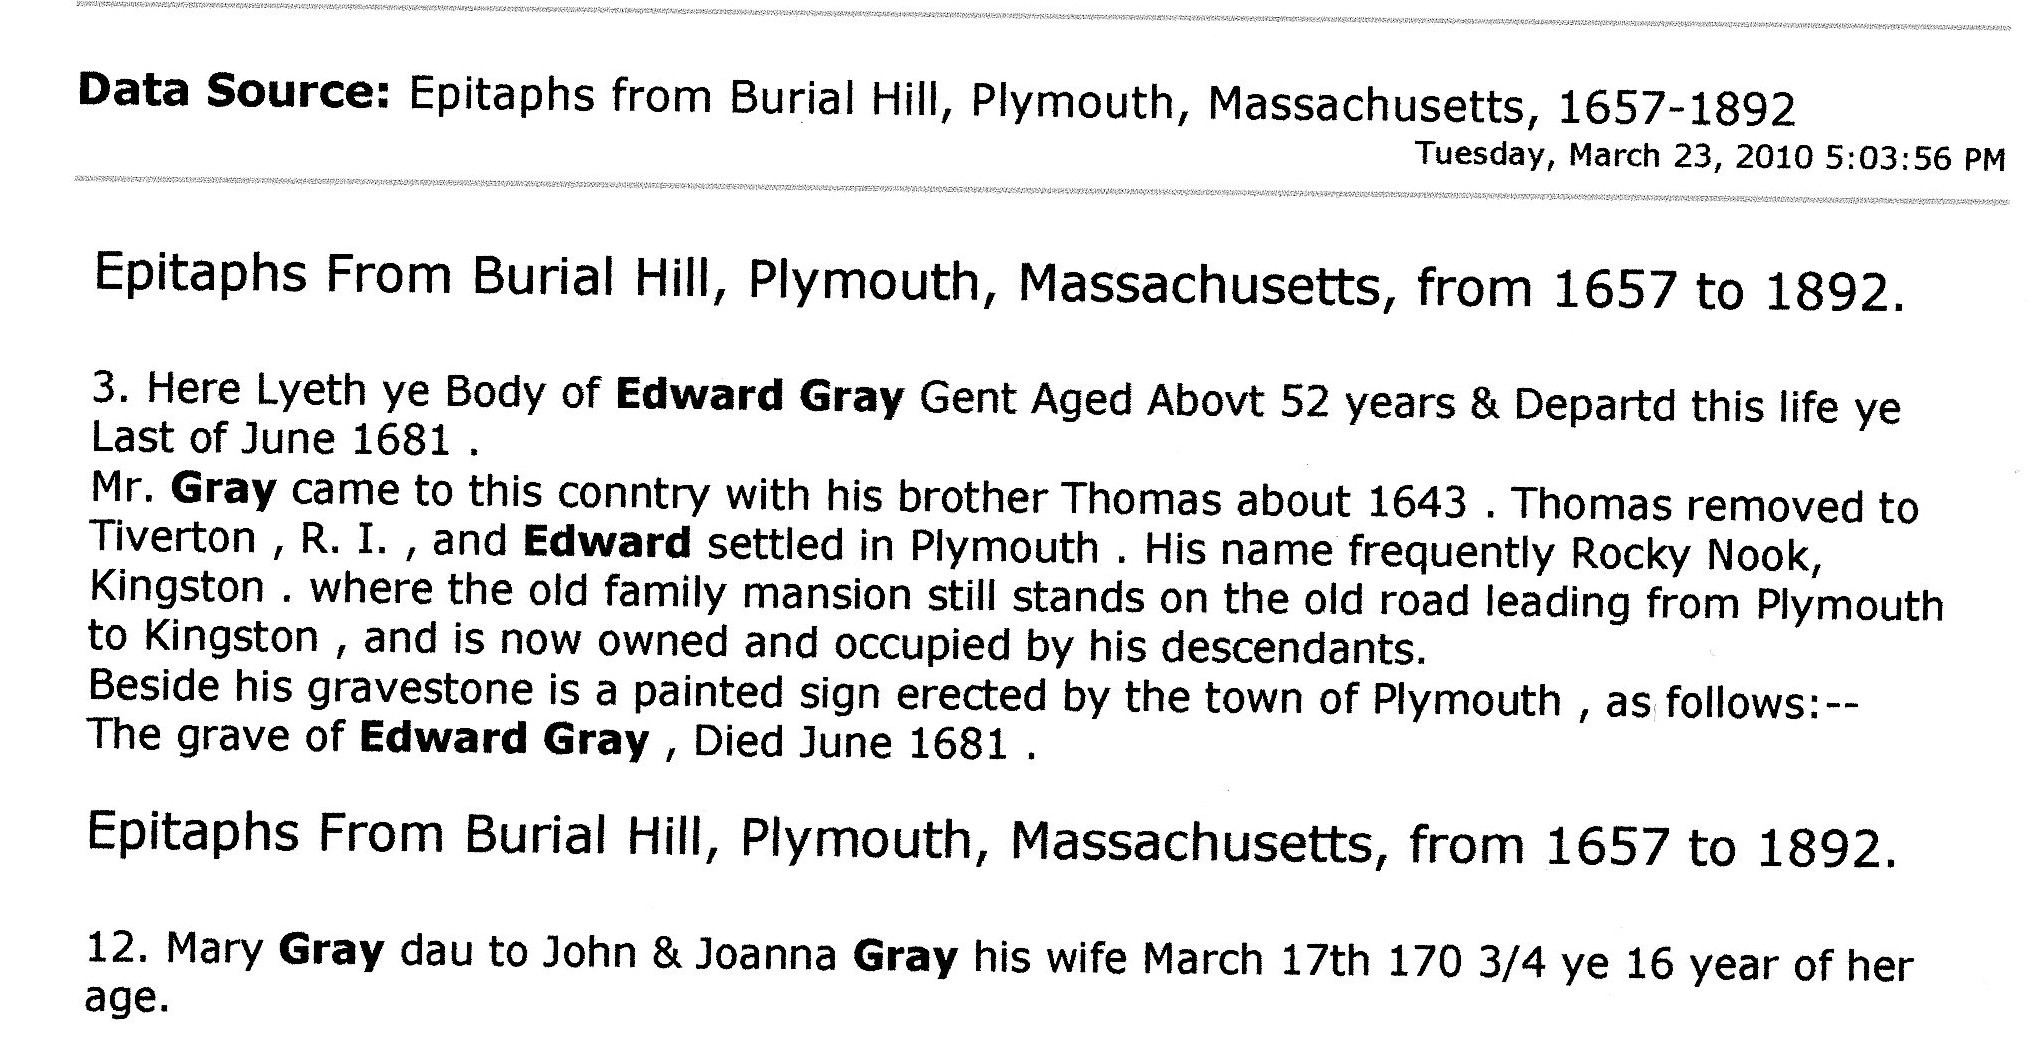 John's sons, Edward & Thomas Gray, arrived in Colonial America abt. c. 1643.